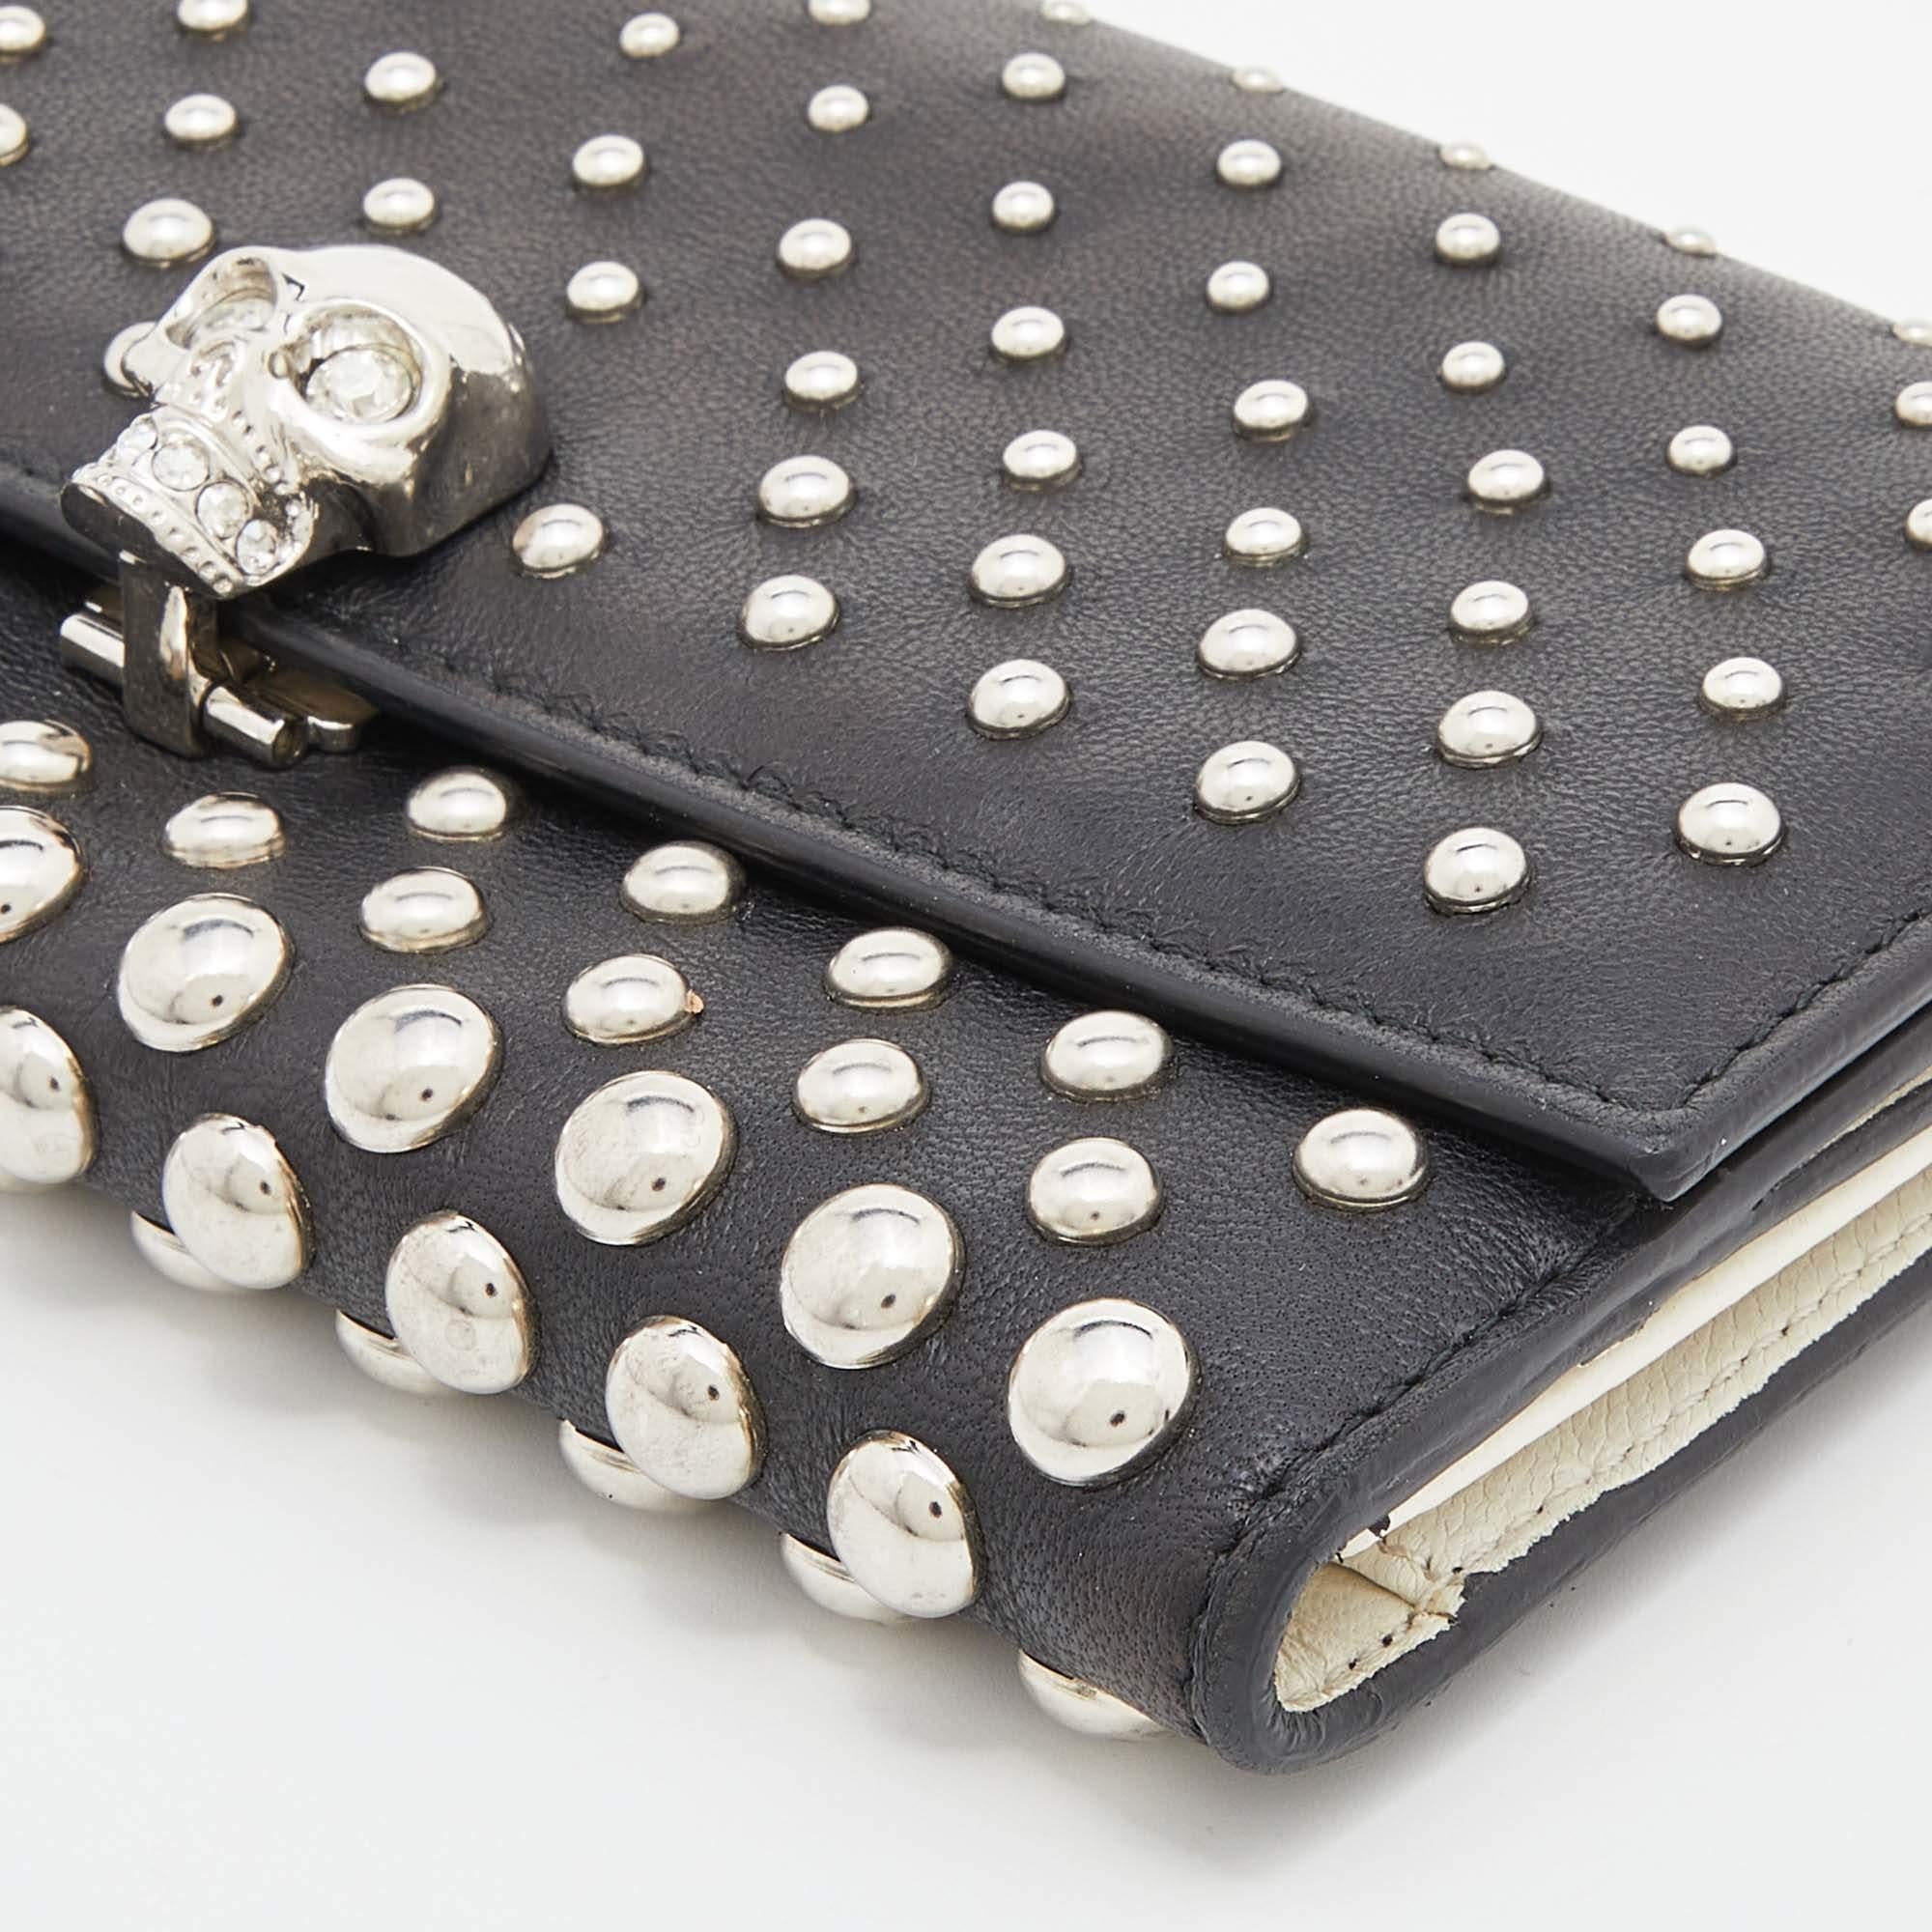 Alexander McQueen Black Leather Studded Skull French Wallet 5